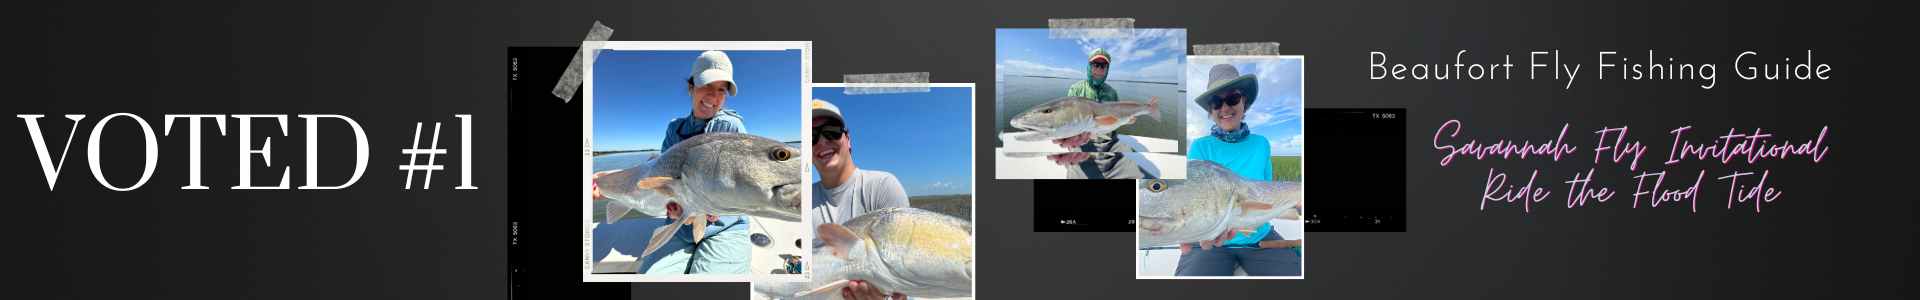 Voted Best Fly Fishing Guide in Beaufort